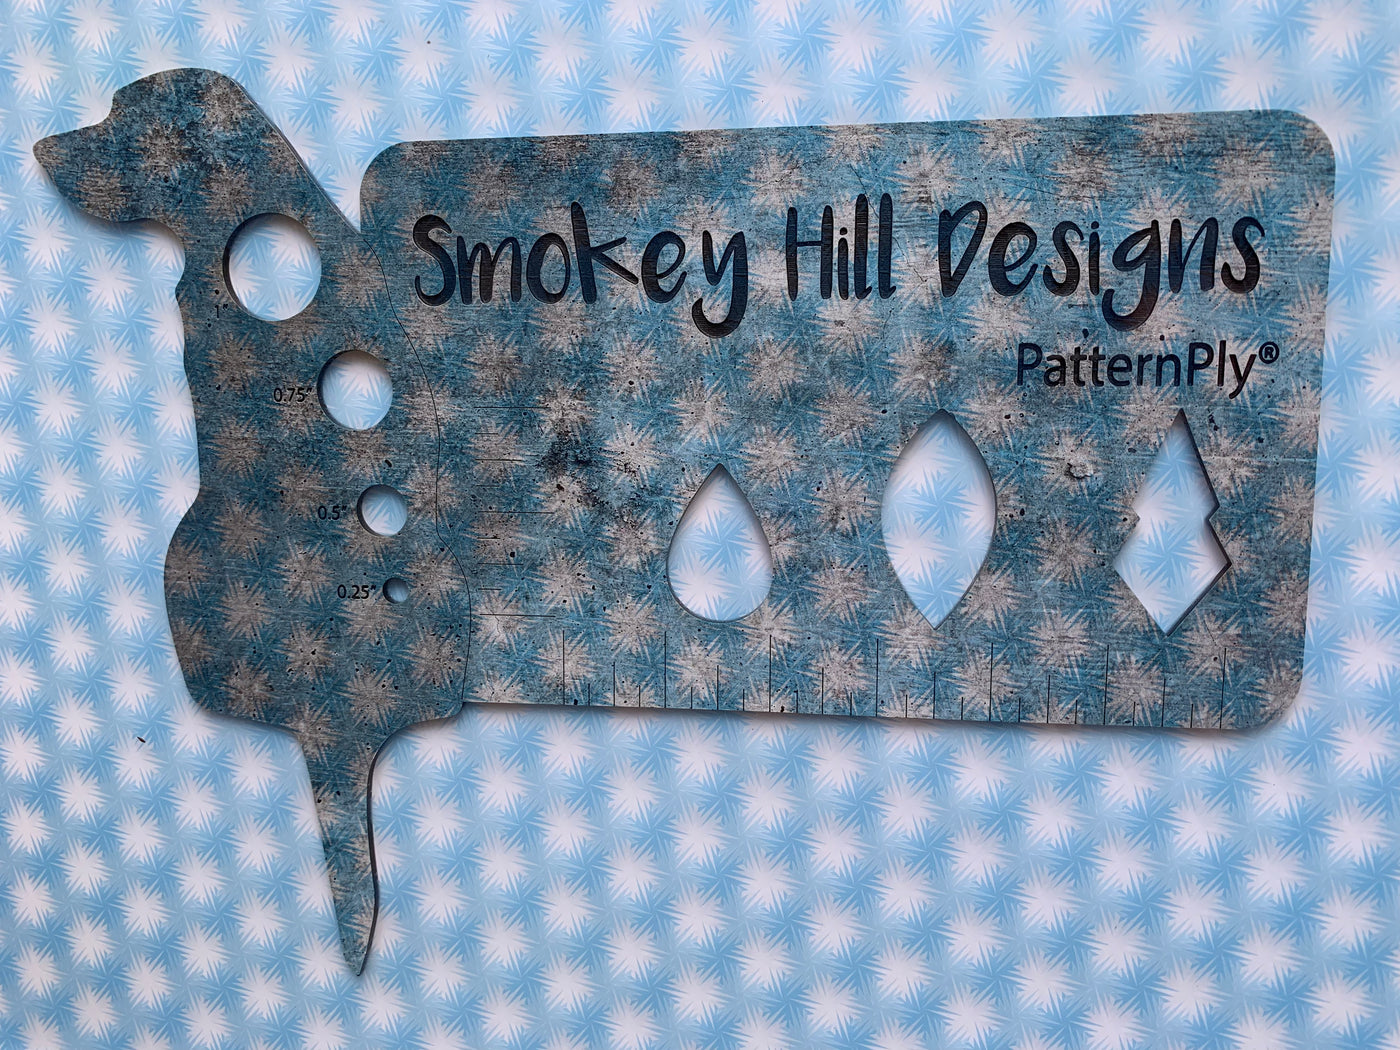 PatternPly® Acrylic Transparent Blue Abstract Snowflakes